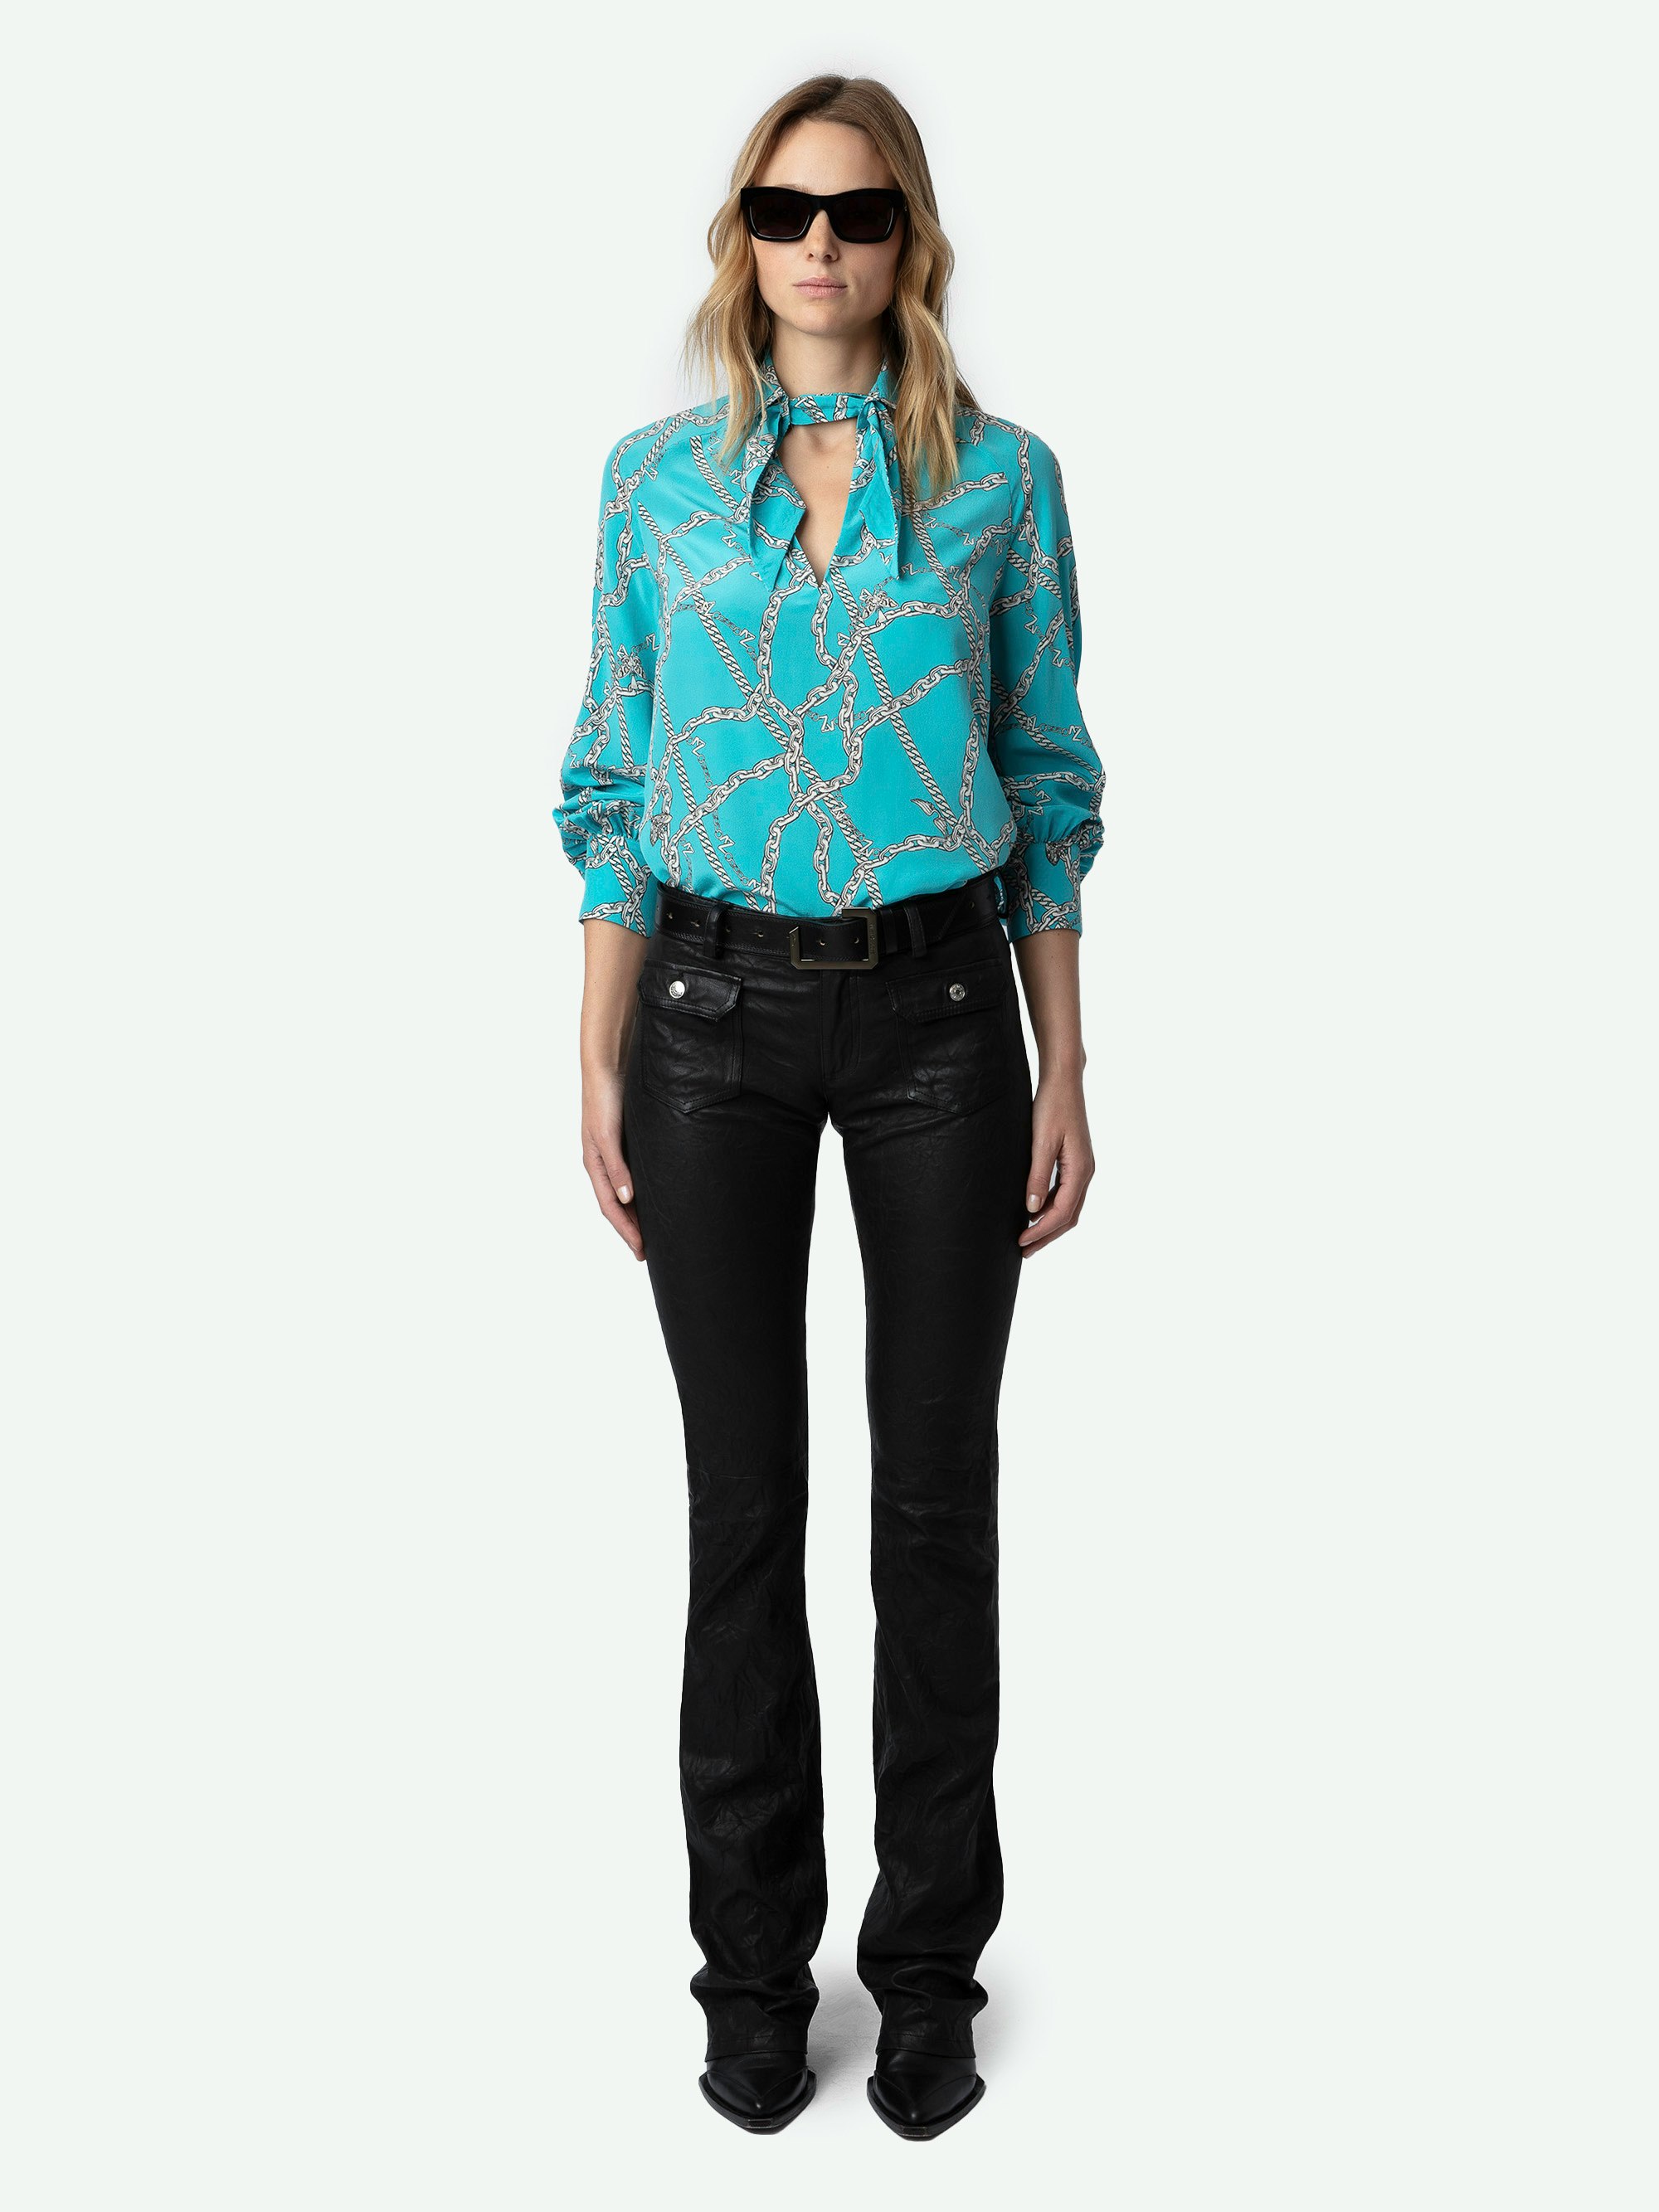 Tuile Silk Blouse - Long-sleeved blue silk blouse with ZV chain motifs and V-neck with removable necktie.